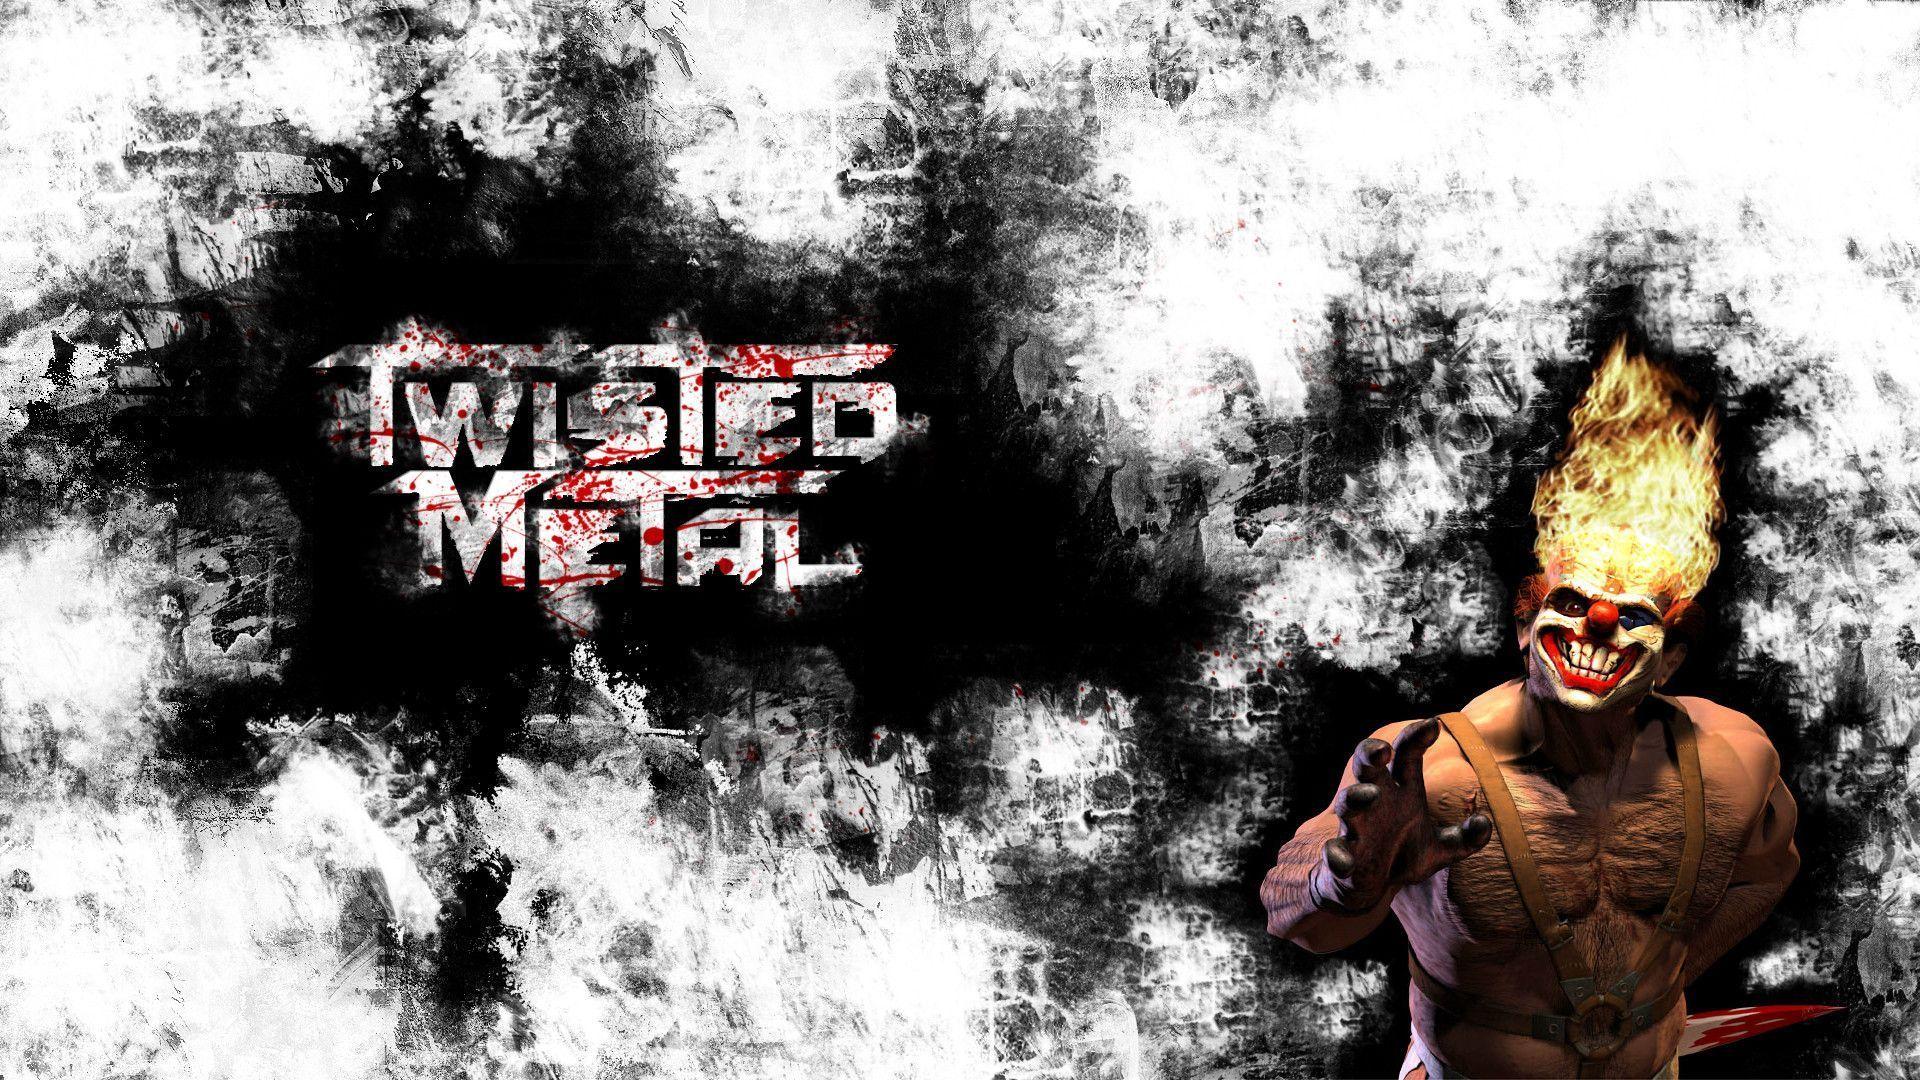 image For > Twisted Metal Ps3 Wallpaper